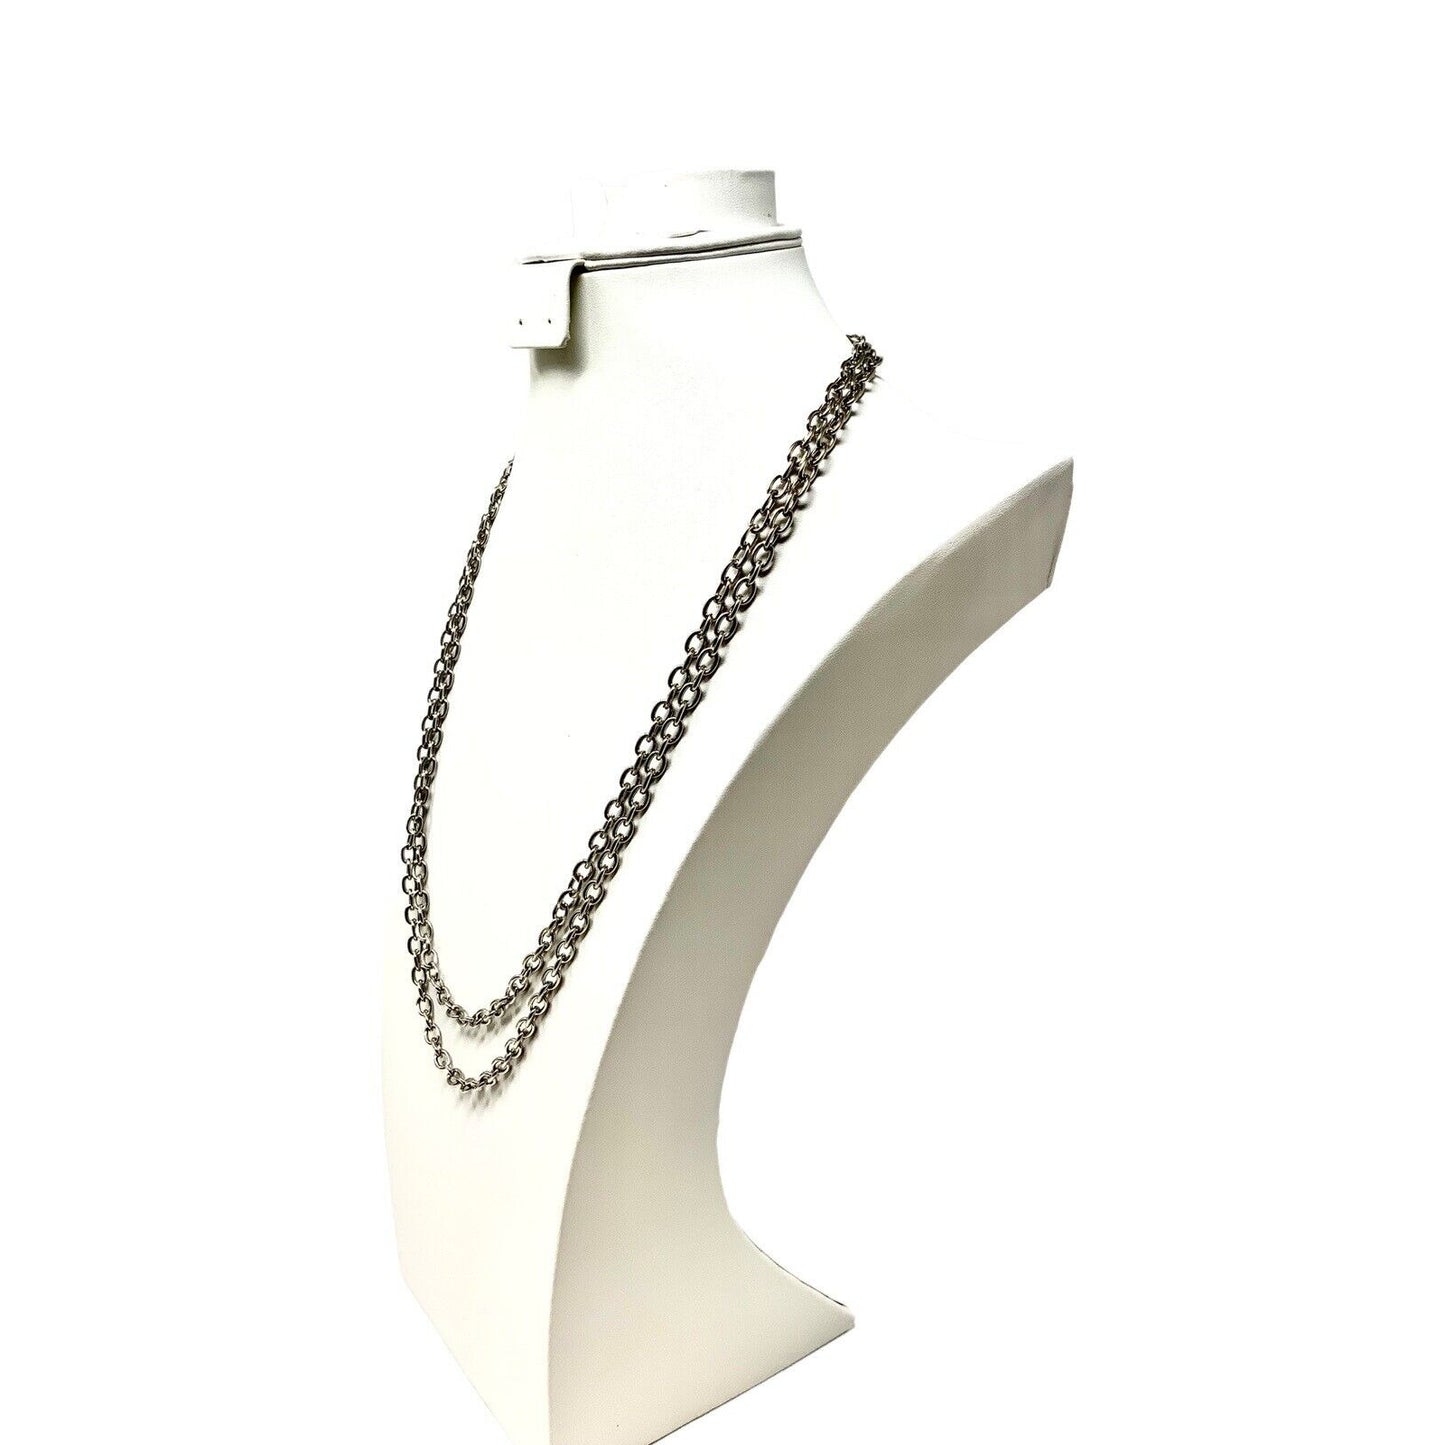 Looped Chain Linked Silver-Tone Necklace